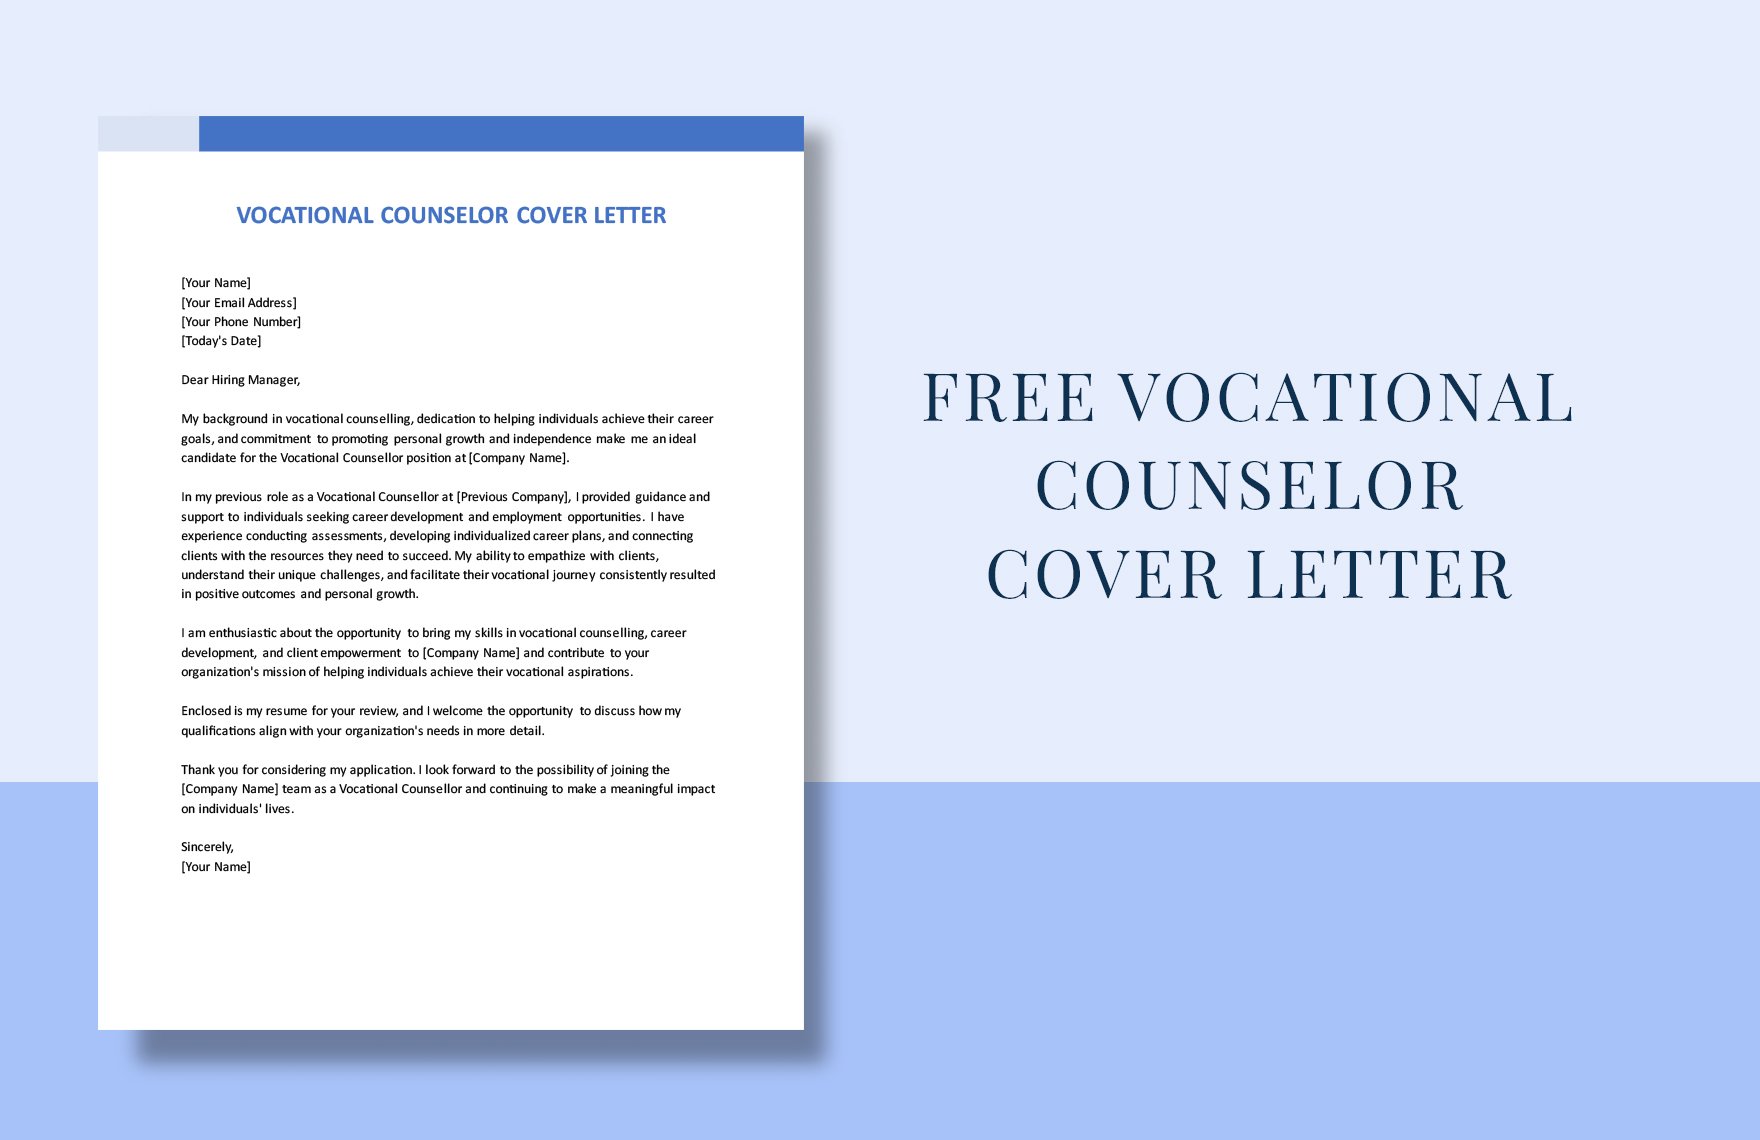 Vocational Counselor Cover Letter